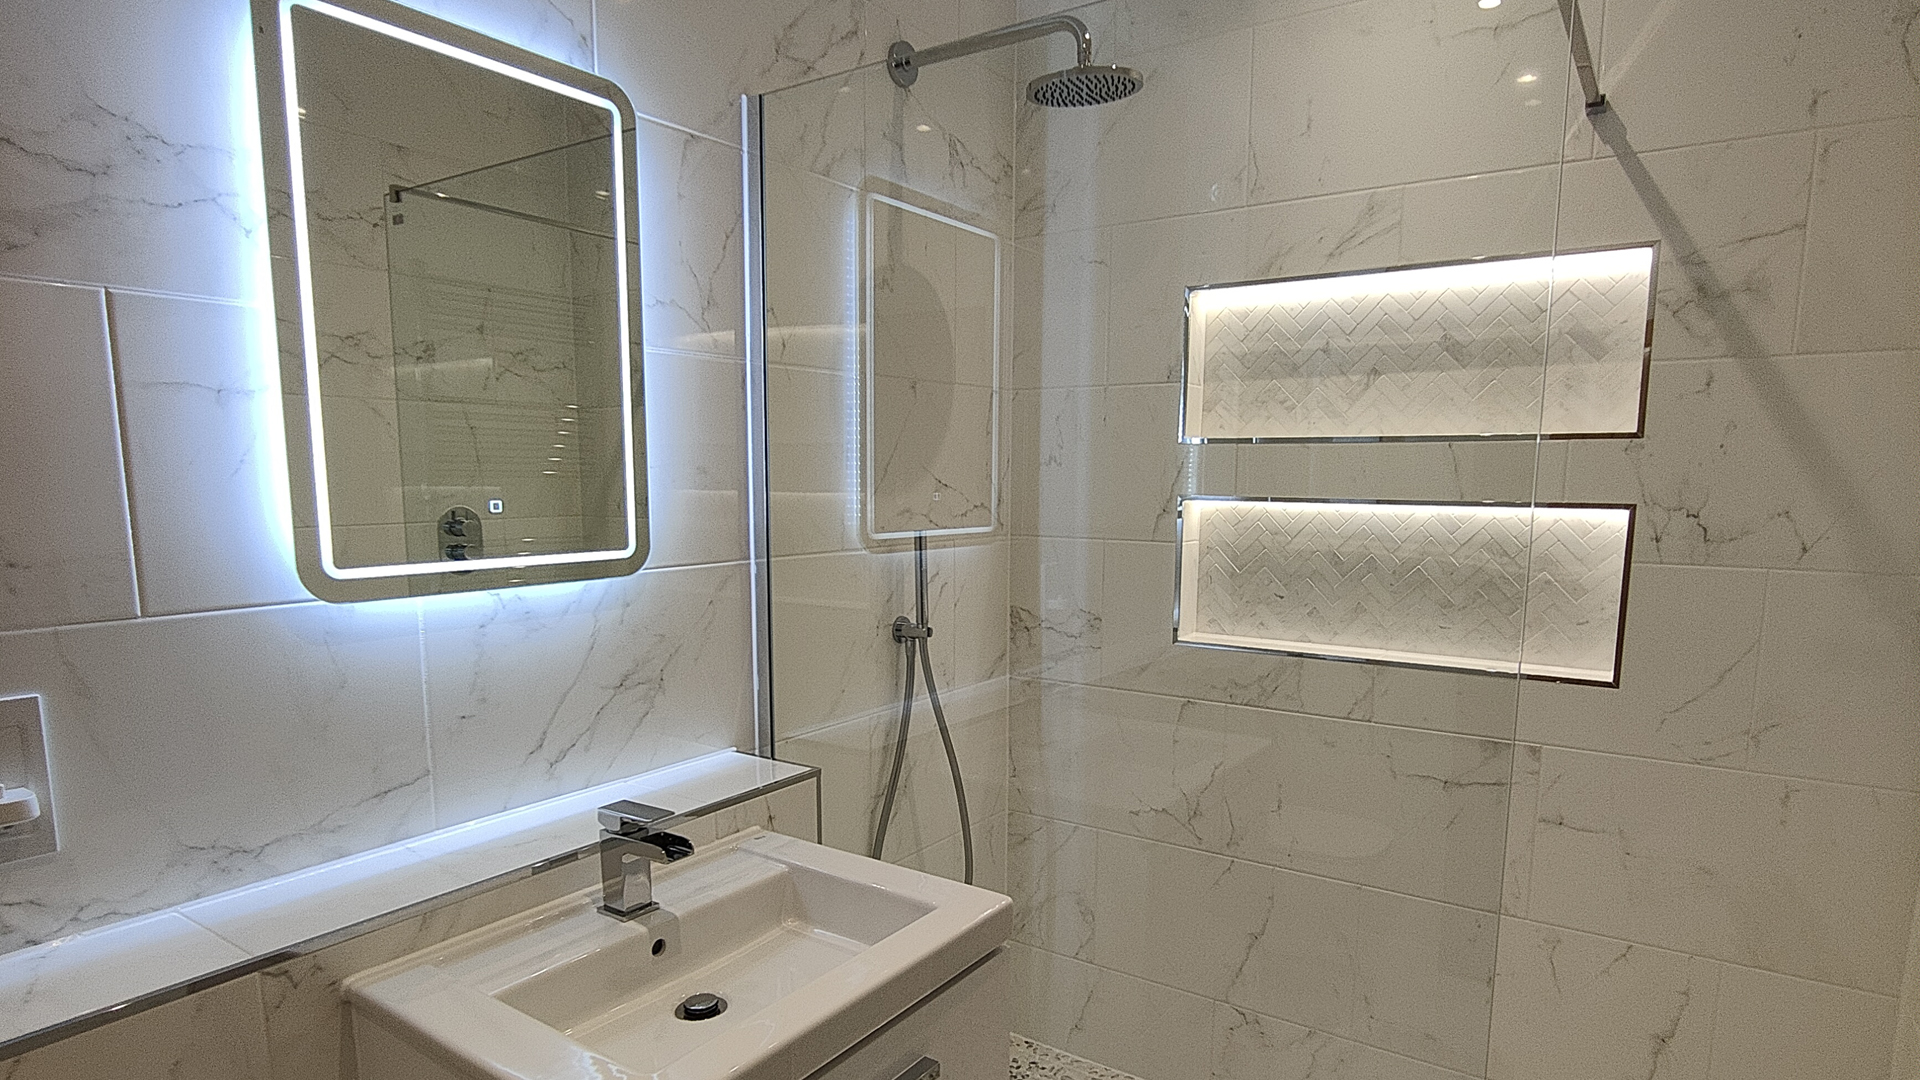 Marble tiled bathroom with light up mirror and recessed shelves in shower wall